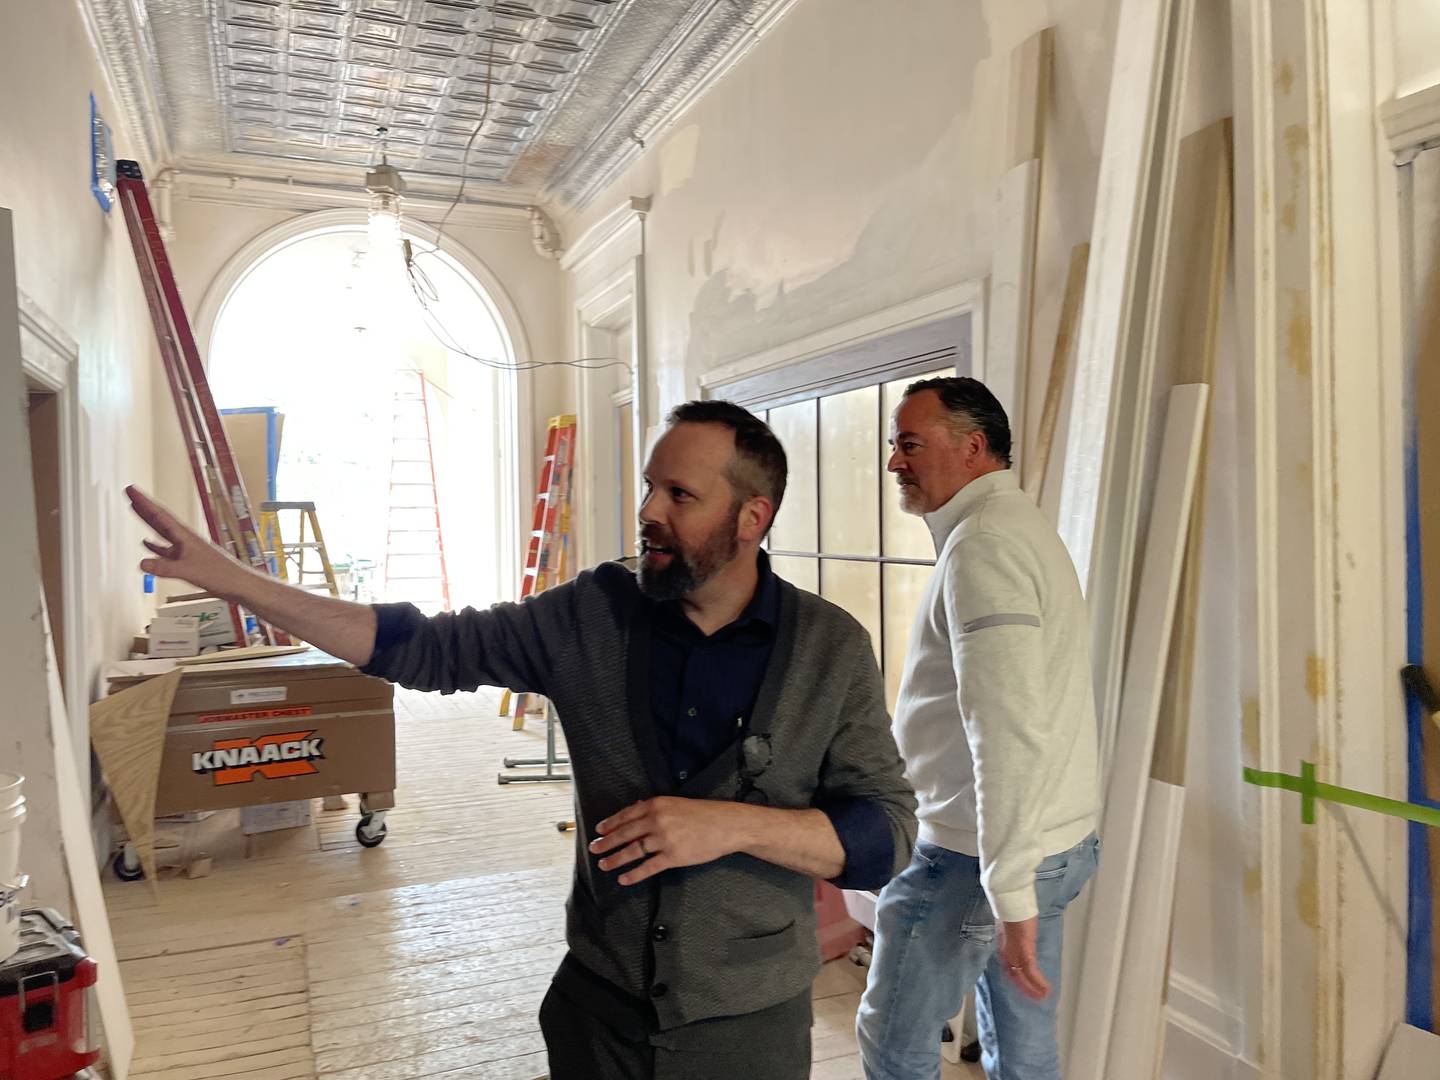 Woodstock City Planner Darrell Moore (left) and Woodstock Mayor Mike Turner (right) walk through the Old Courthouse and Sheriff's House on Thursday, May 25, 2023.